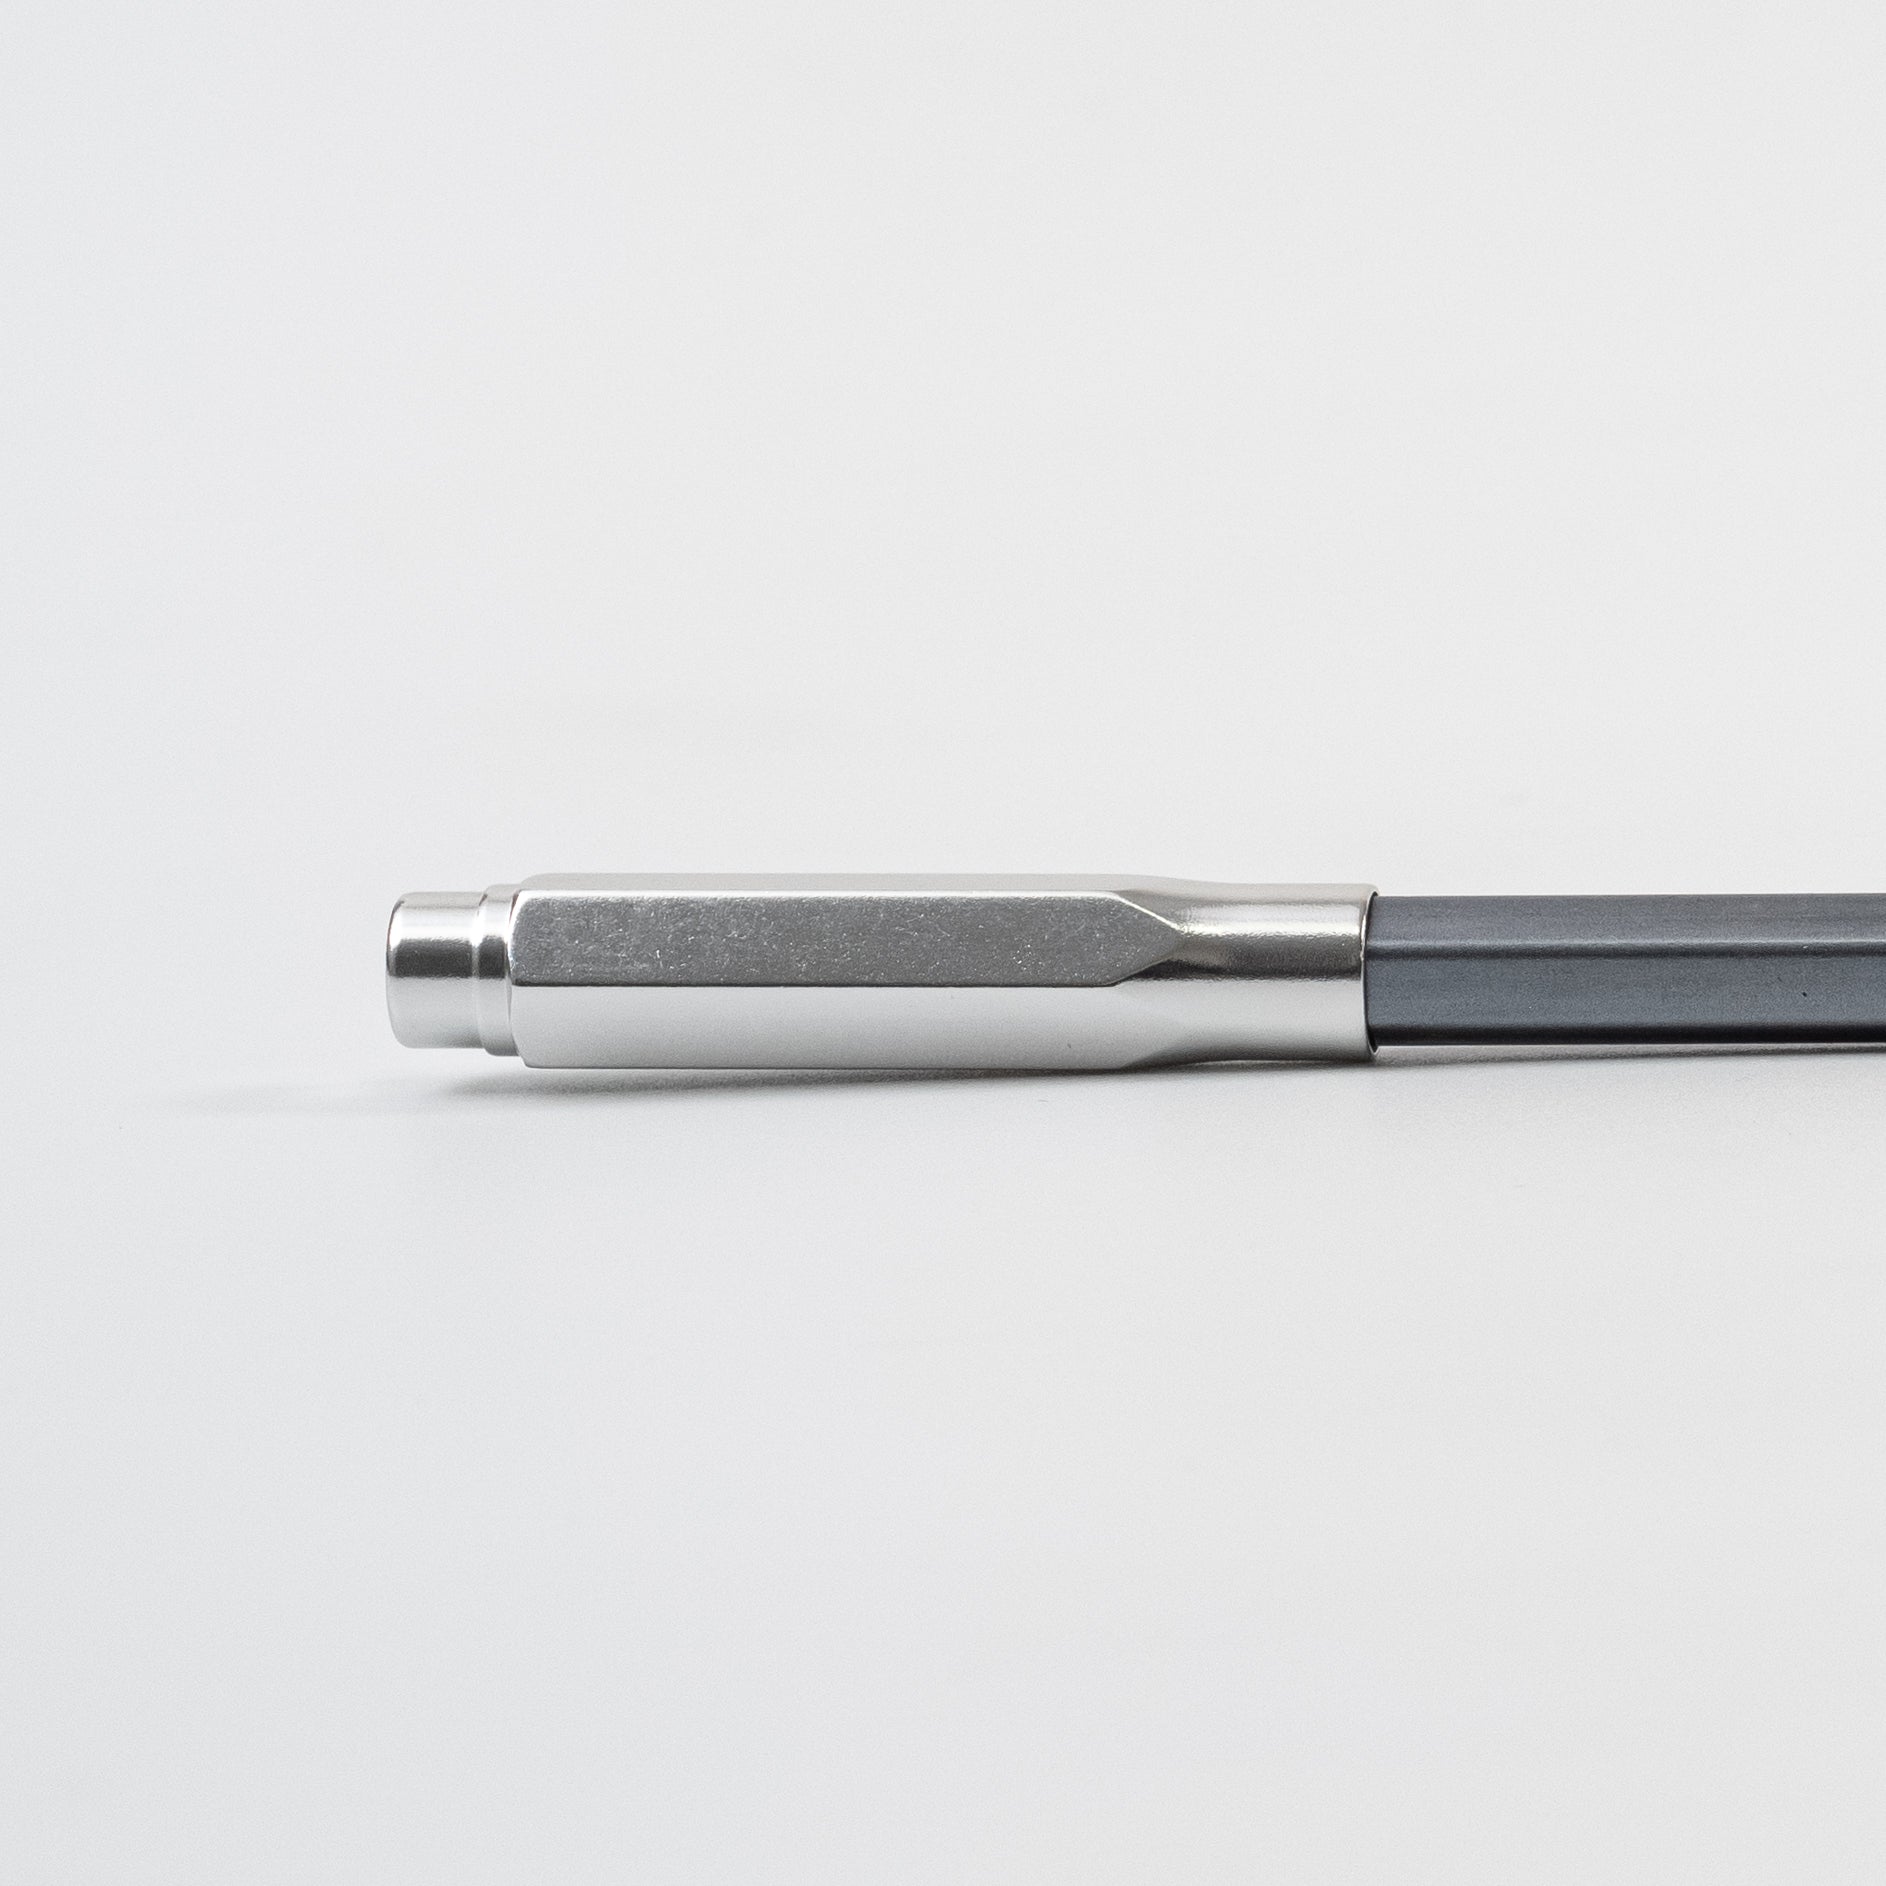 A black, gold, and silver Blackwing Point Guard sits on a white surface next to a Blackwing pencil.